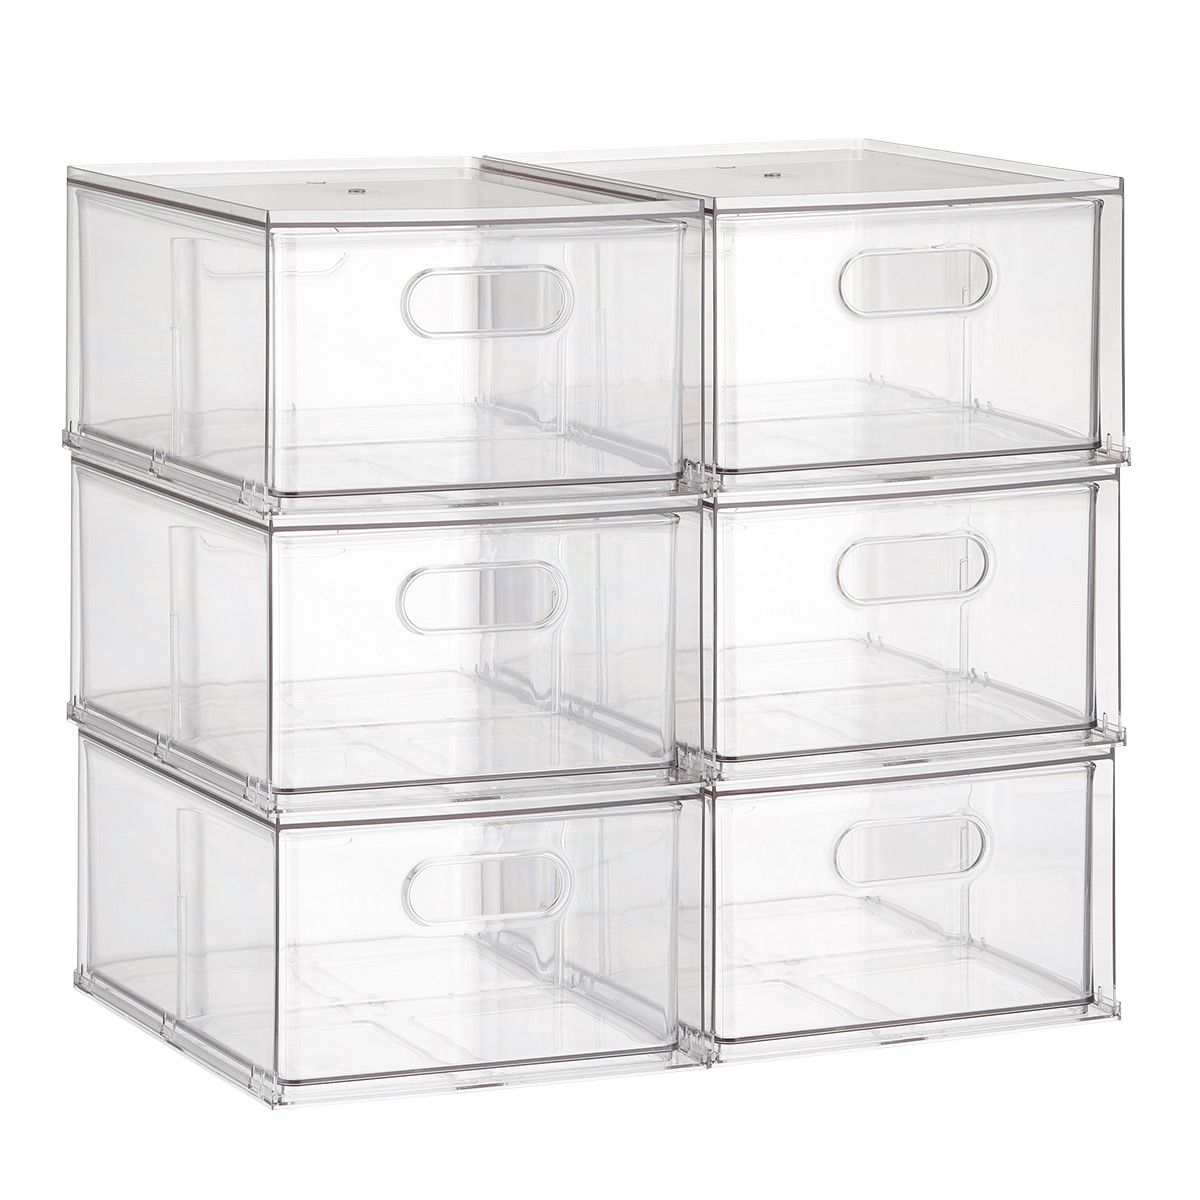 Case of 6 T.H.E. Stackable Drawer | The Container Store